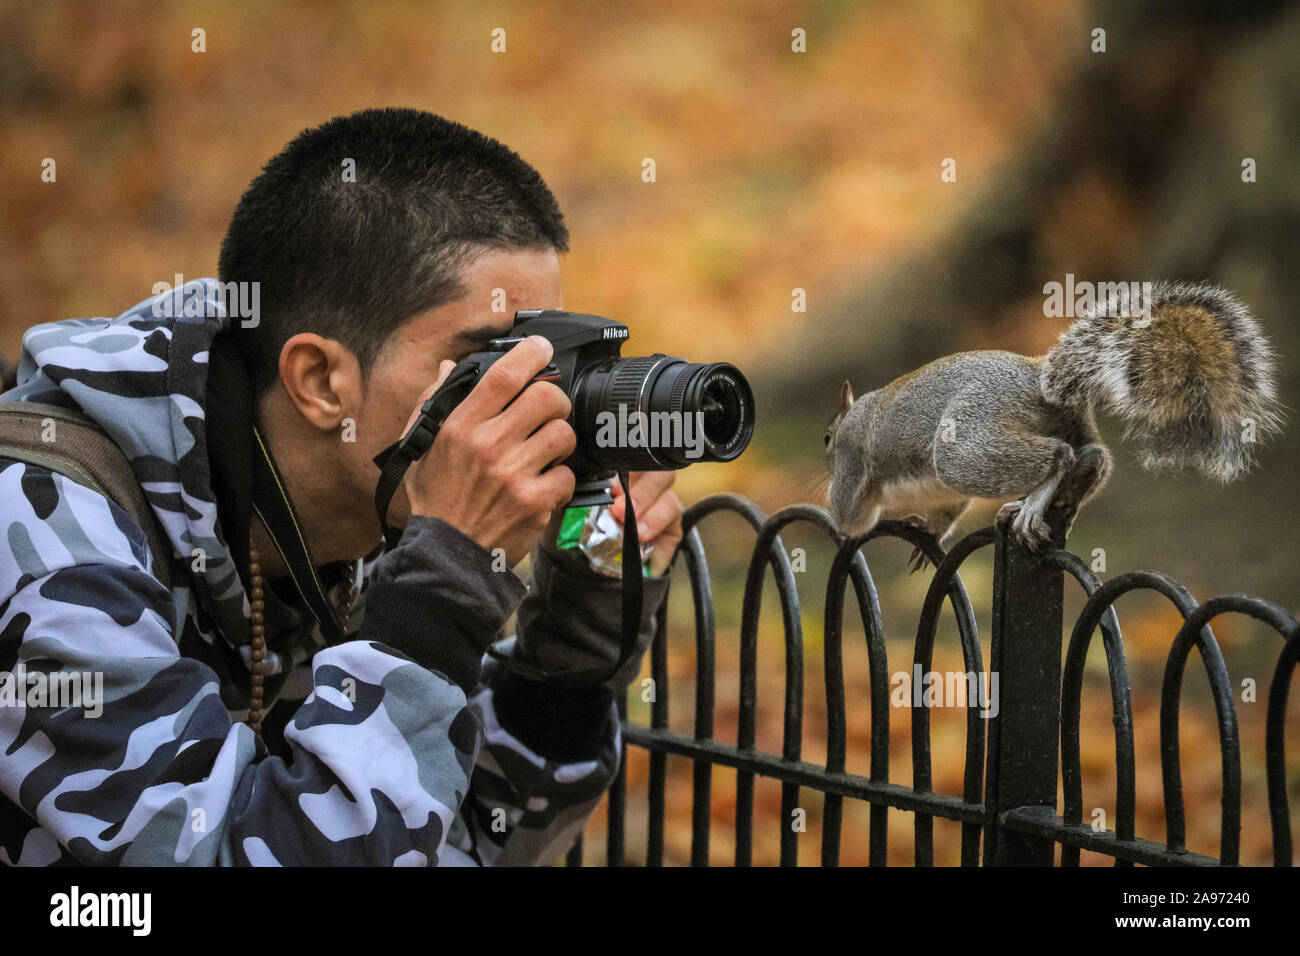 St James's Park, London, UK, 13th November 2019. A  curious squirrel gets close to inspect a tourist's camera. Squirrels in London's St James's Park in Westminster enjoy the late autumn sunshine, digging for nuts and playing in the colourful fallen leaves. Credit: Imageplotter/Alamy Live News Stock Photo